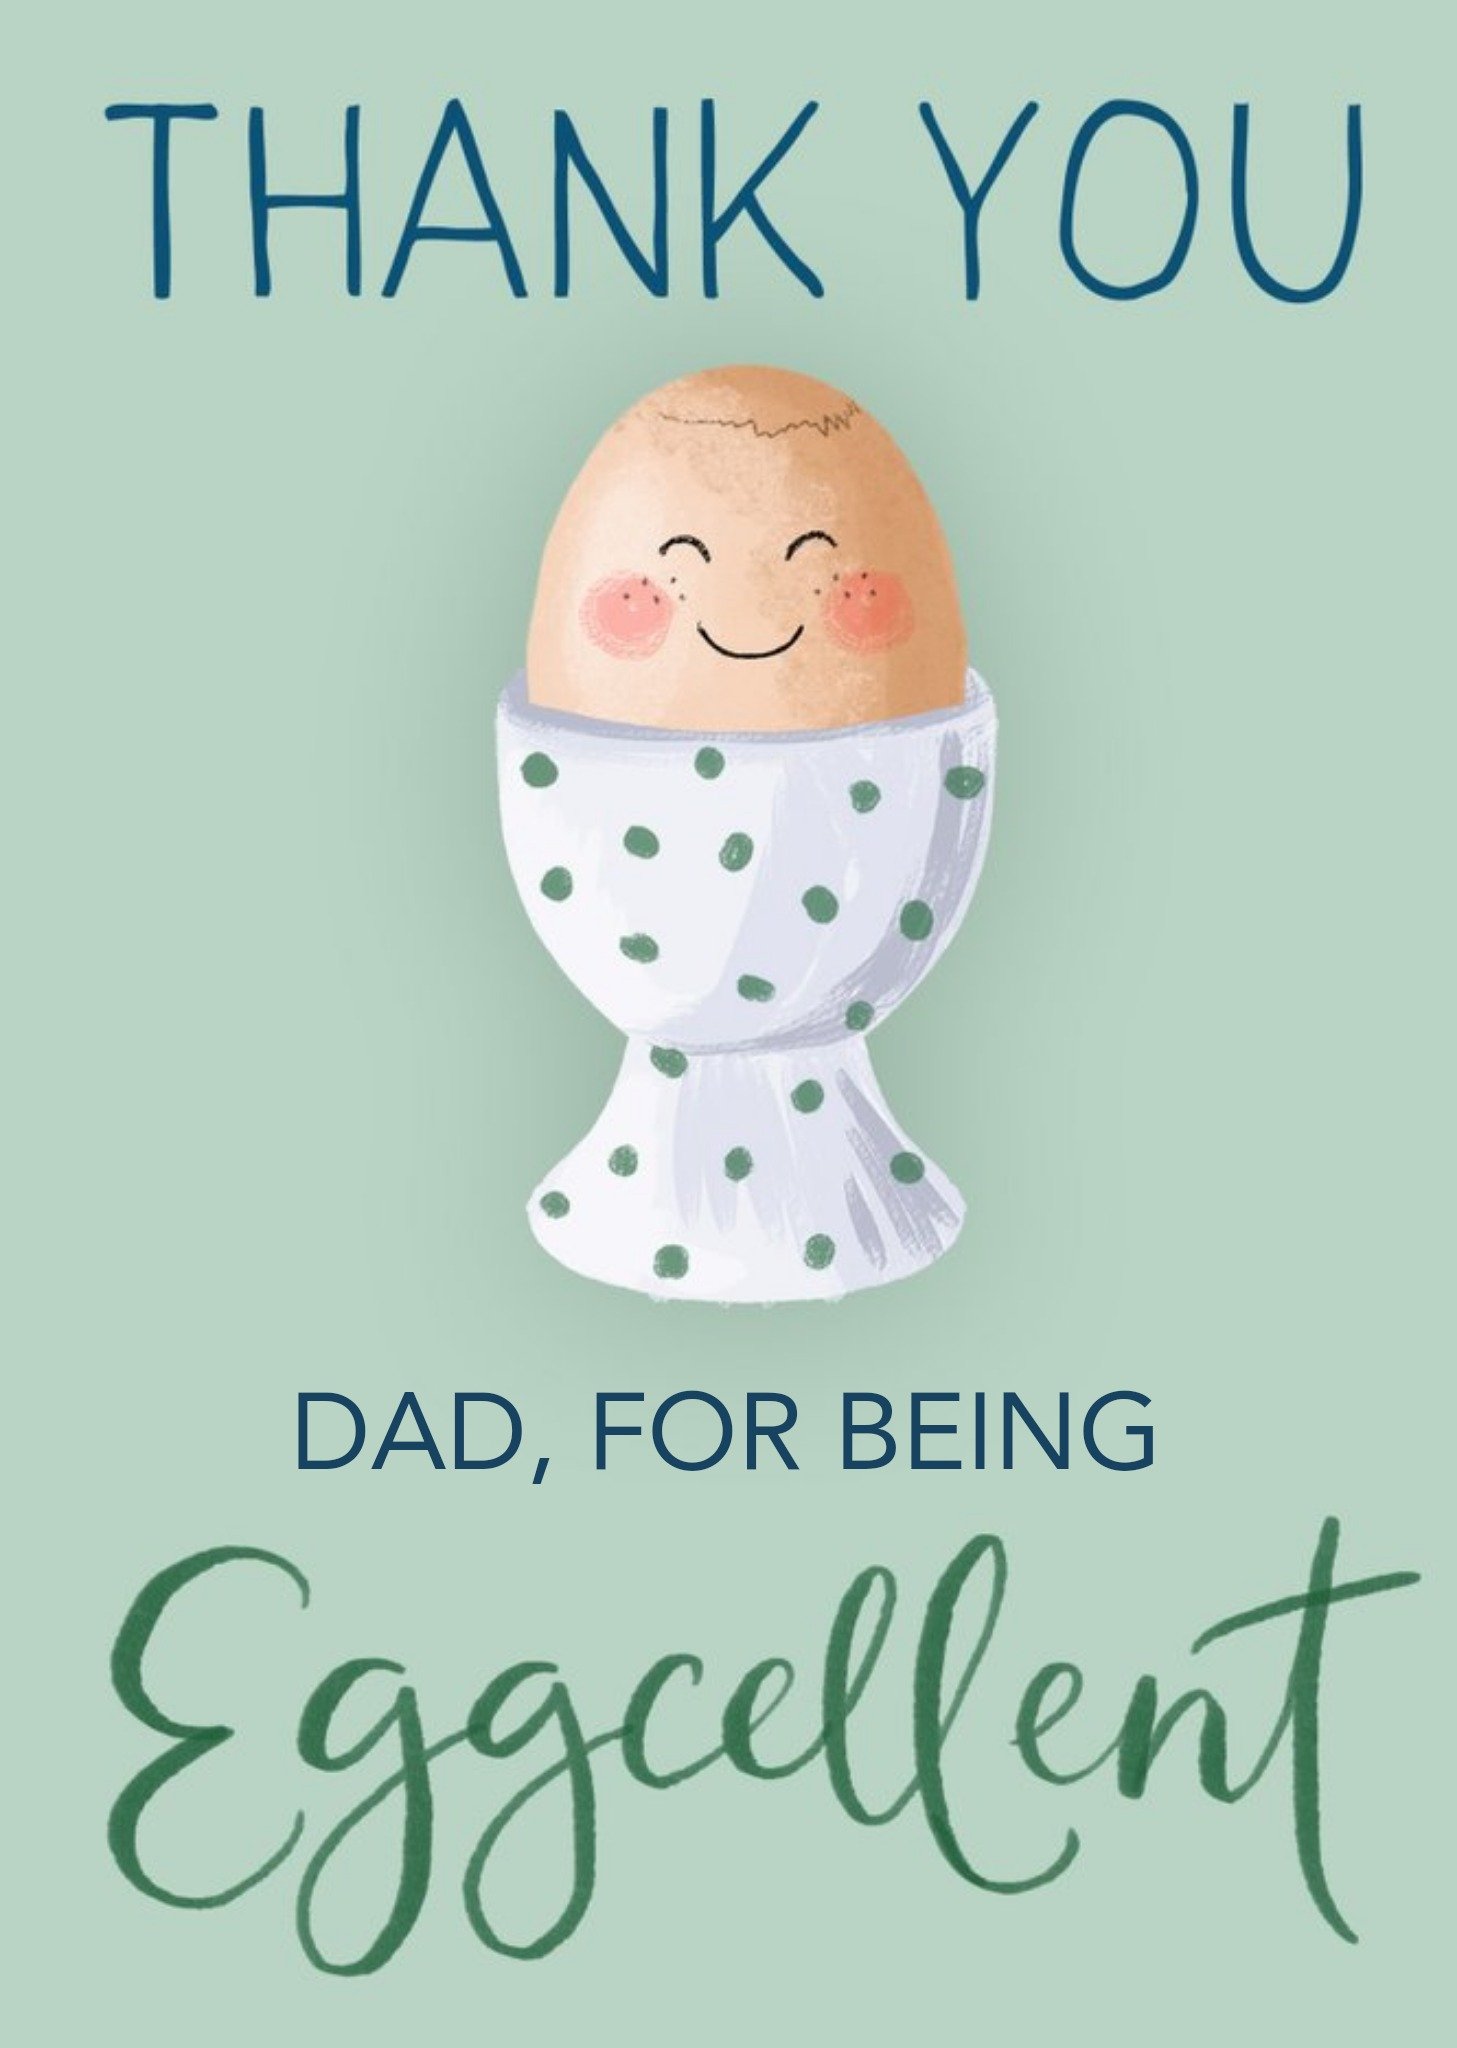 Okey Dokey Design Illustration Of An Egg In An Egg Cup On A Green Background Thank You Dad Card Ecar